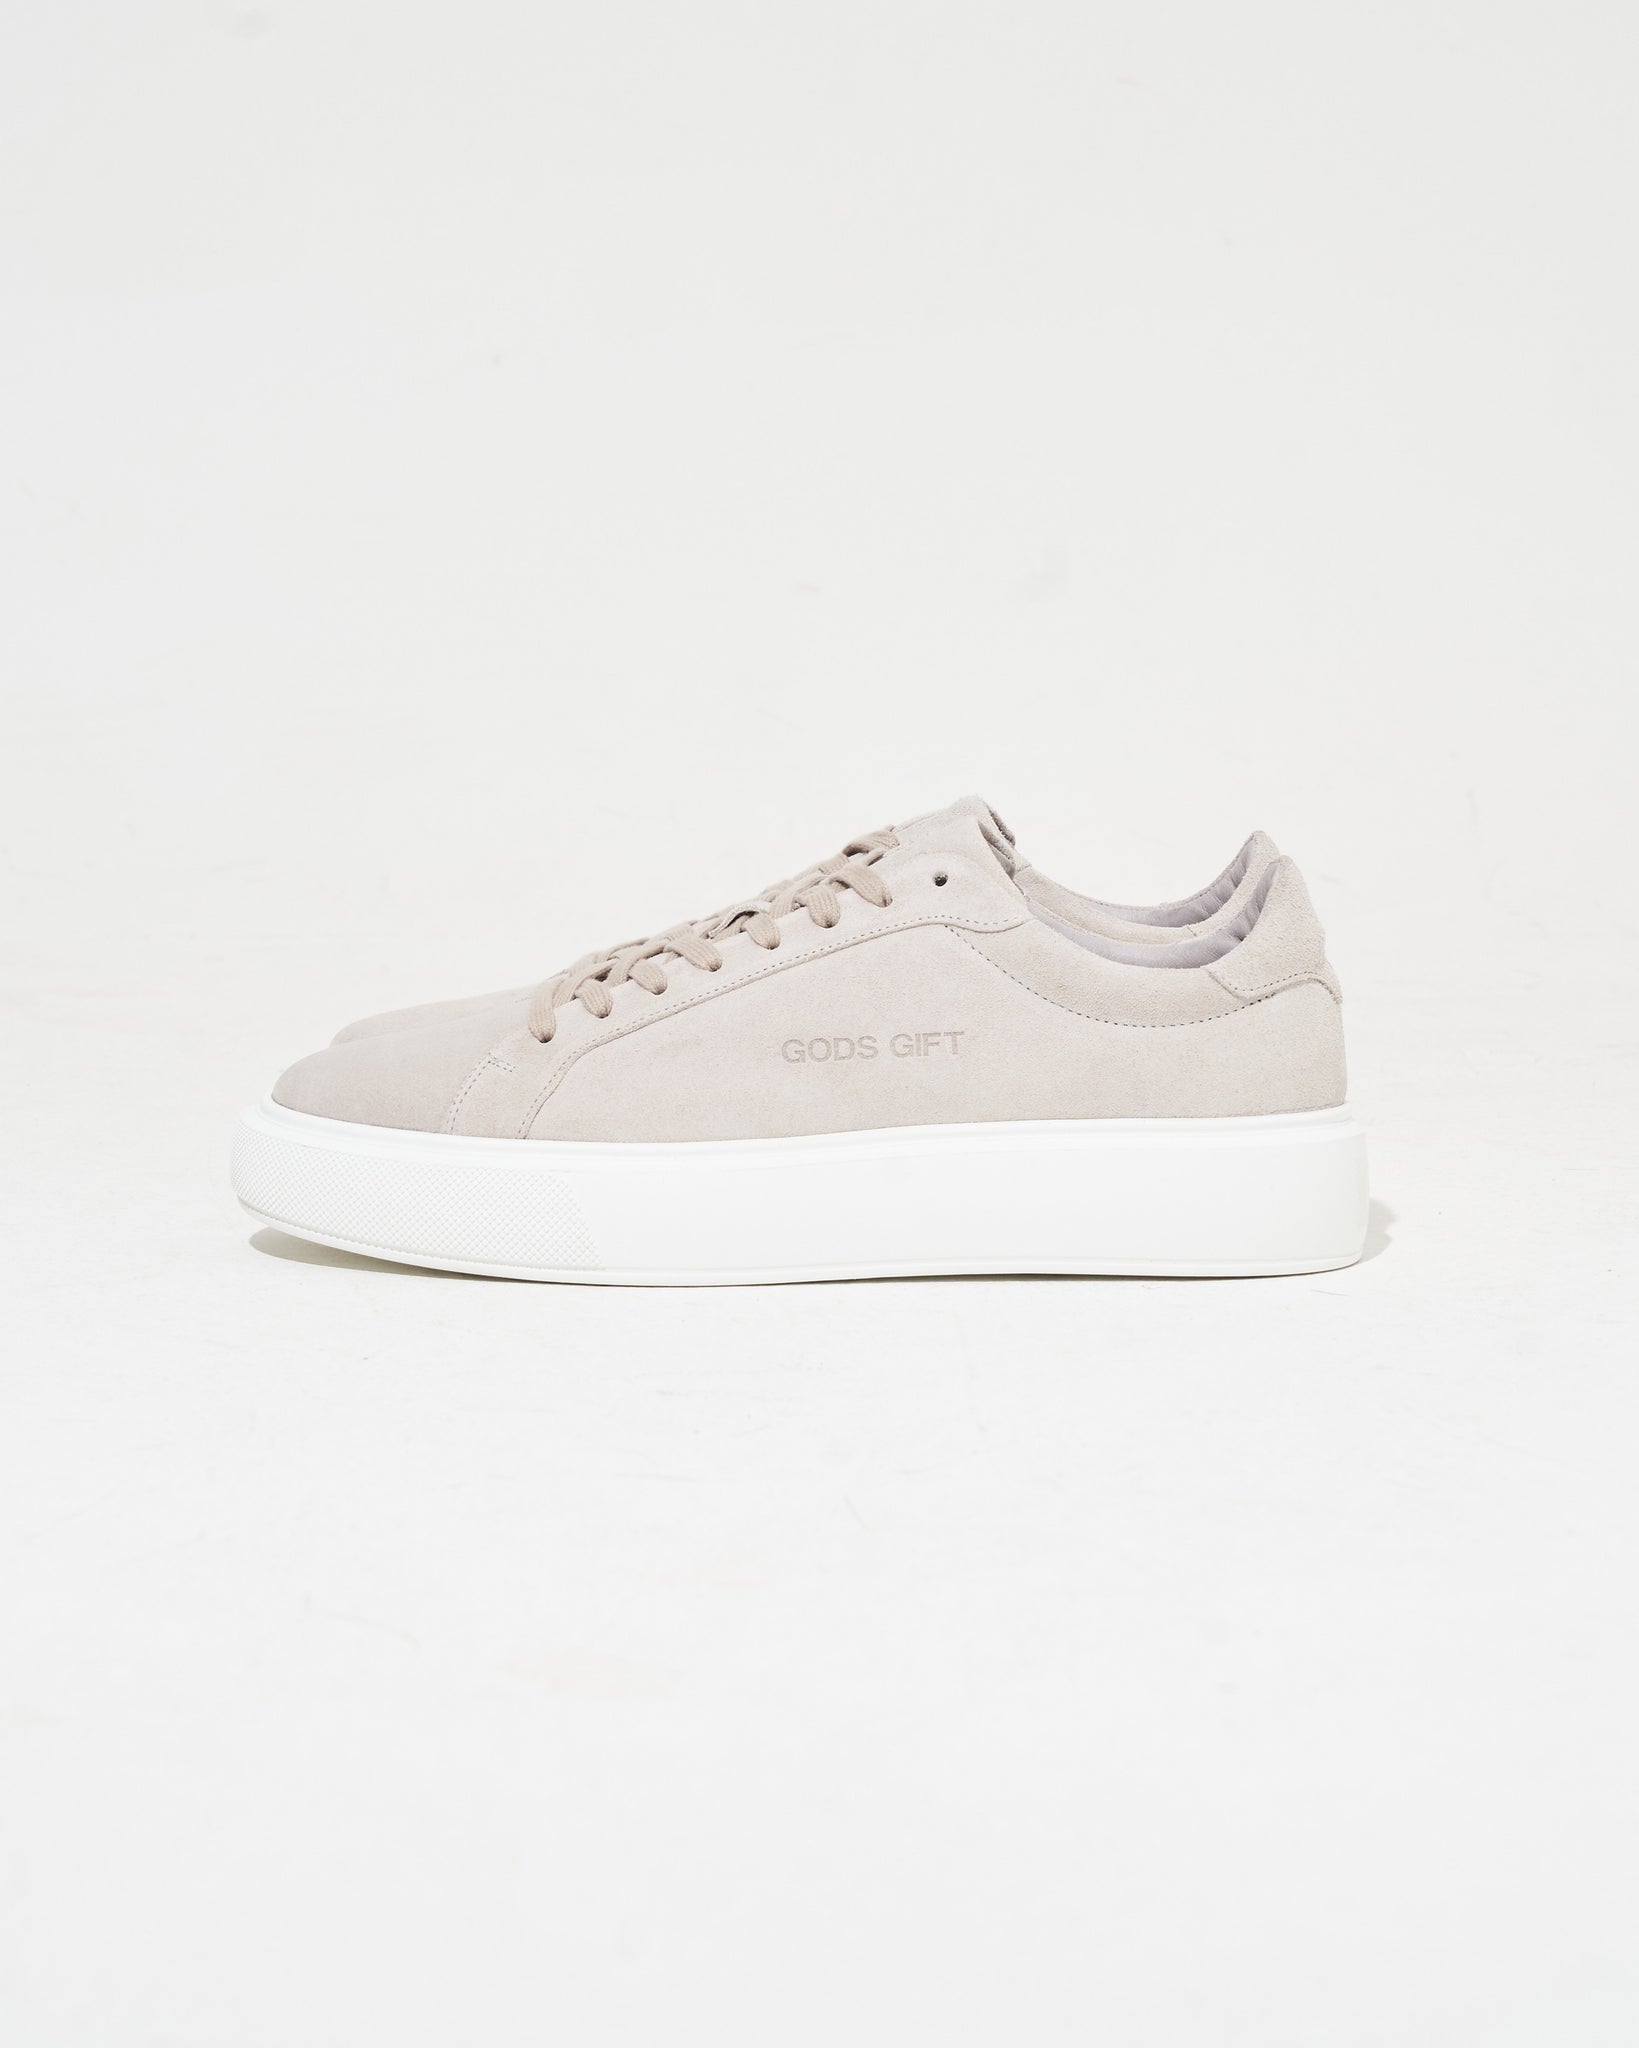 Groves Suede Shoes in Light Grey